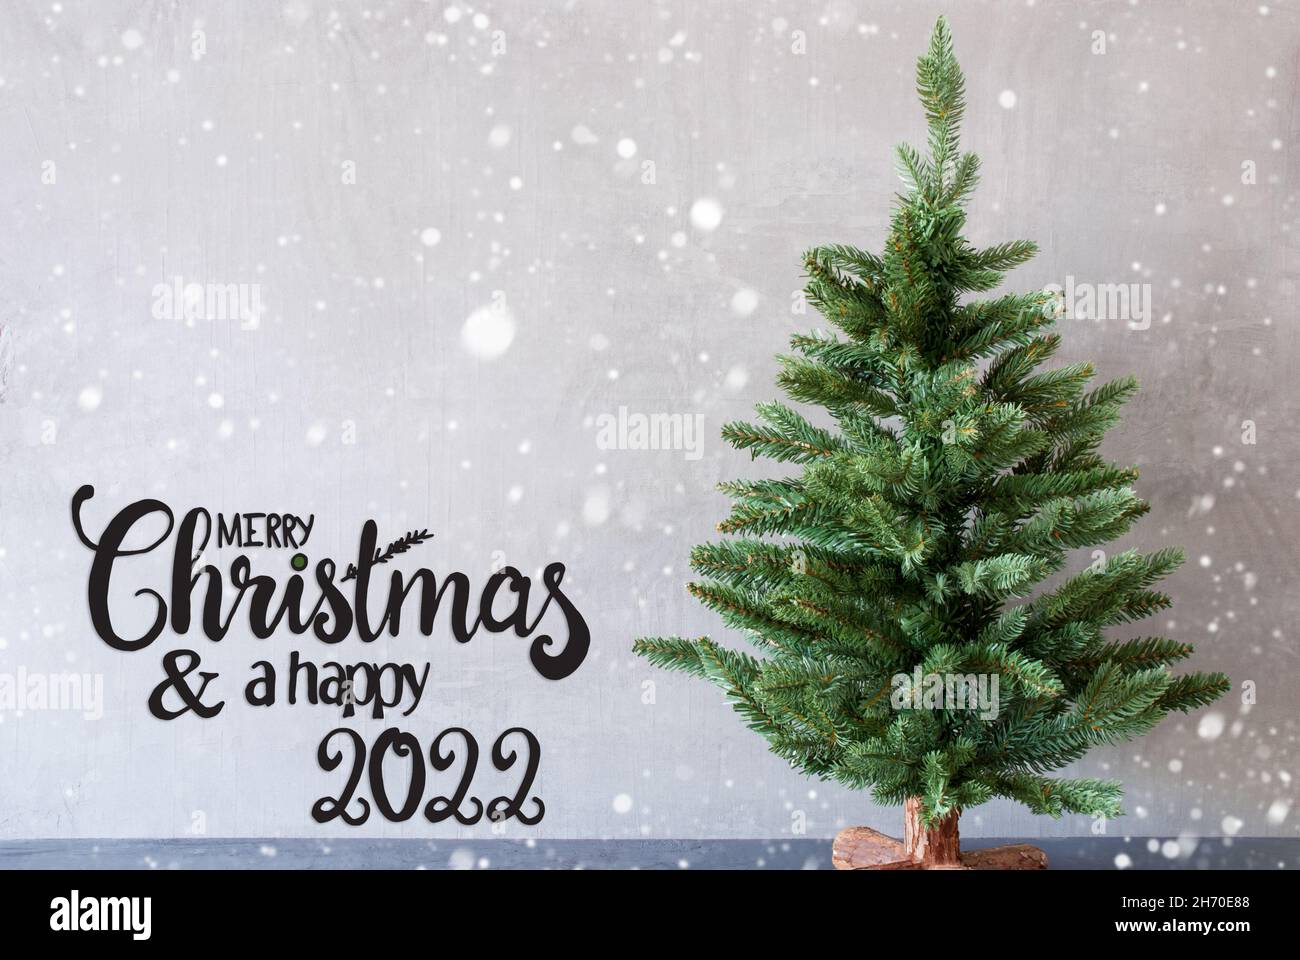 Tree, Merry Christmas And A Happy 2022, Cement Background, Snowflakes Stock Photo